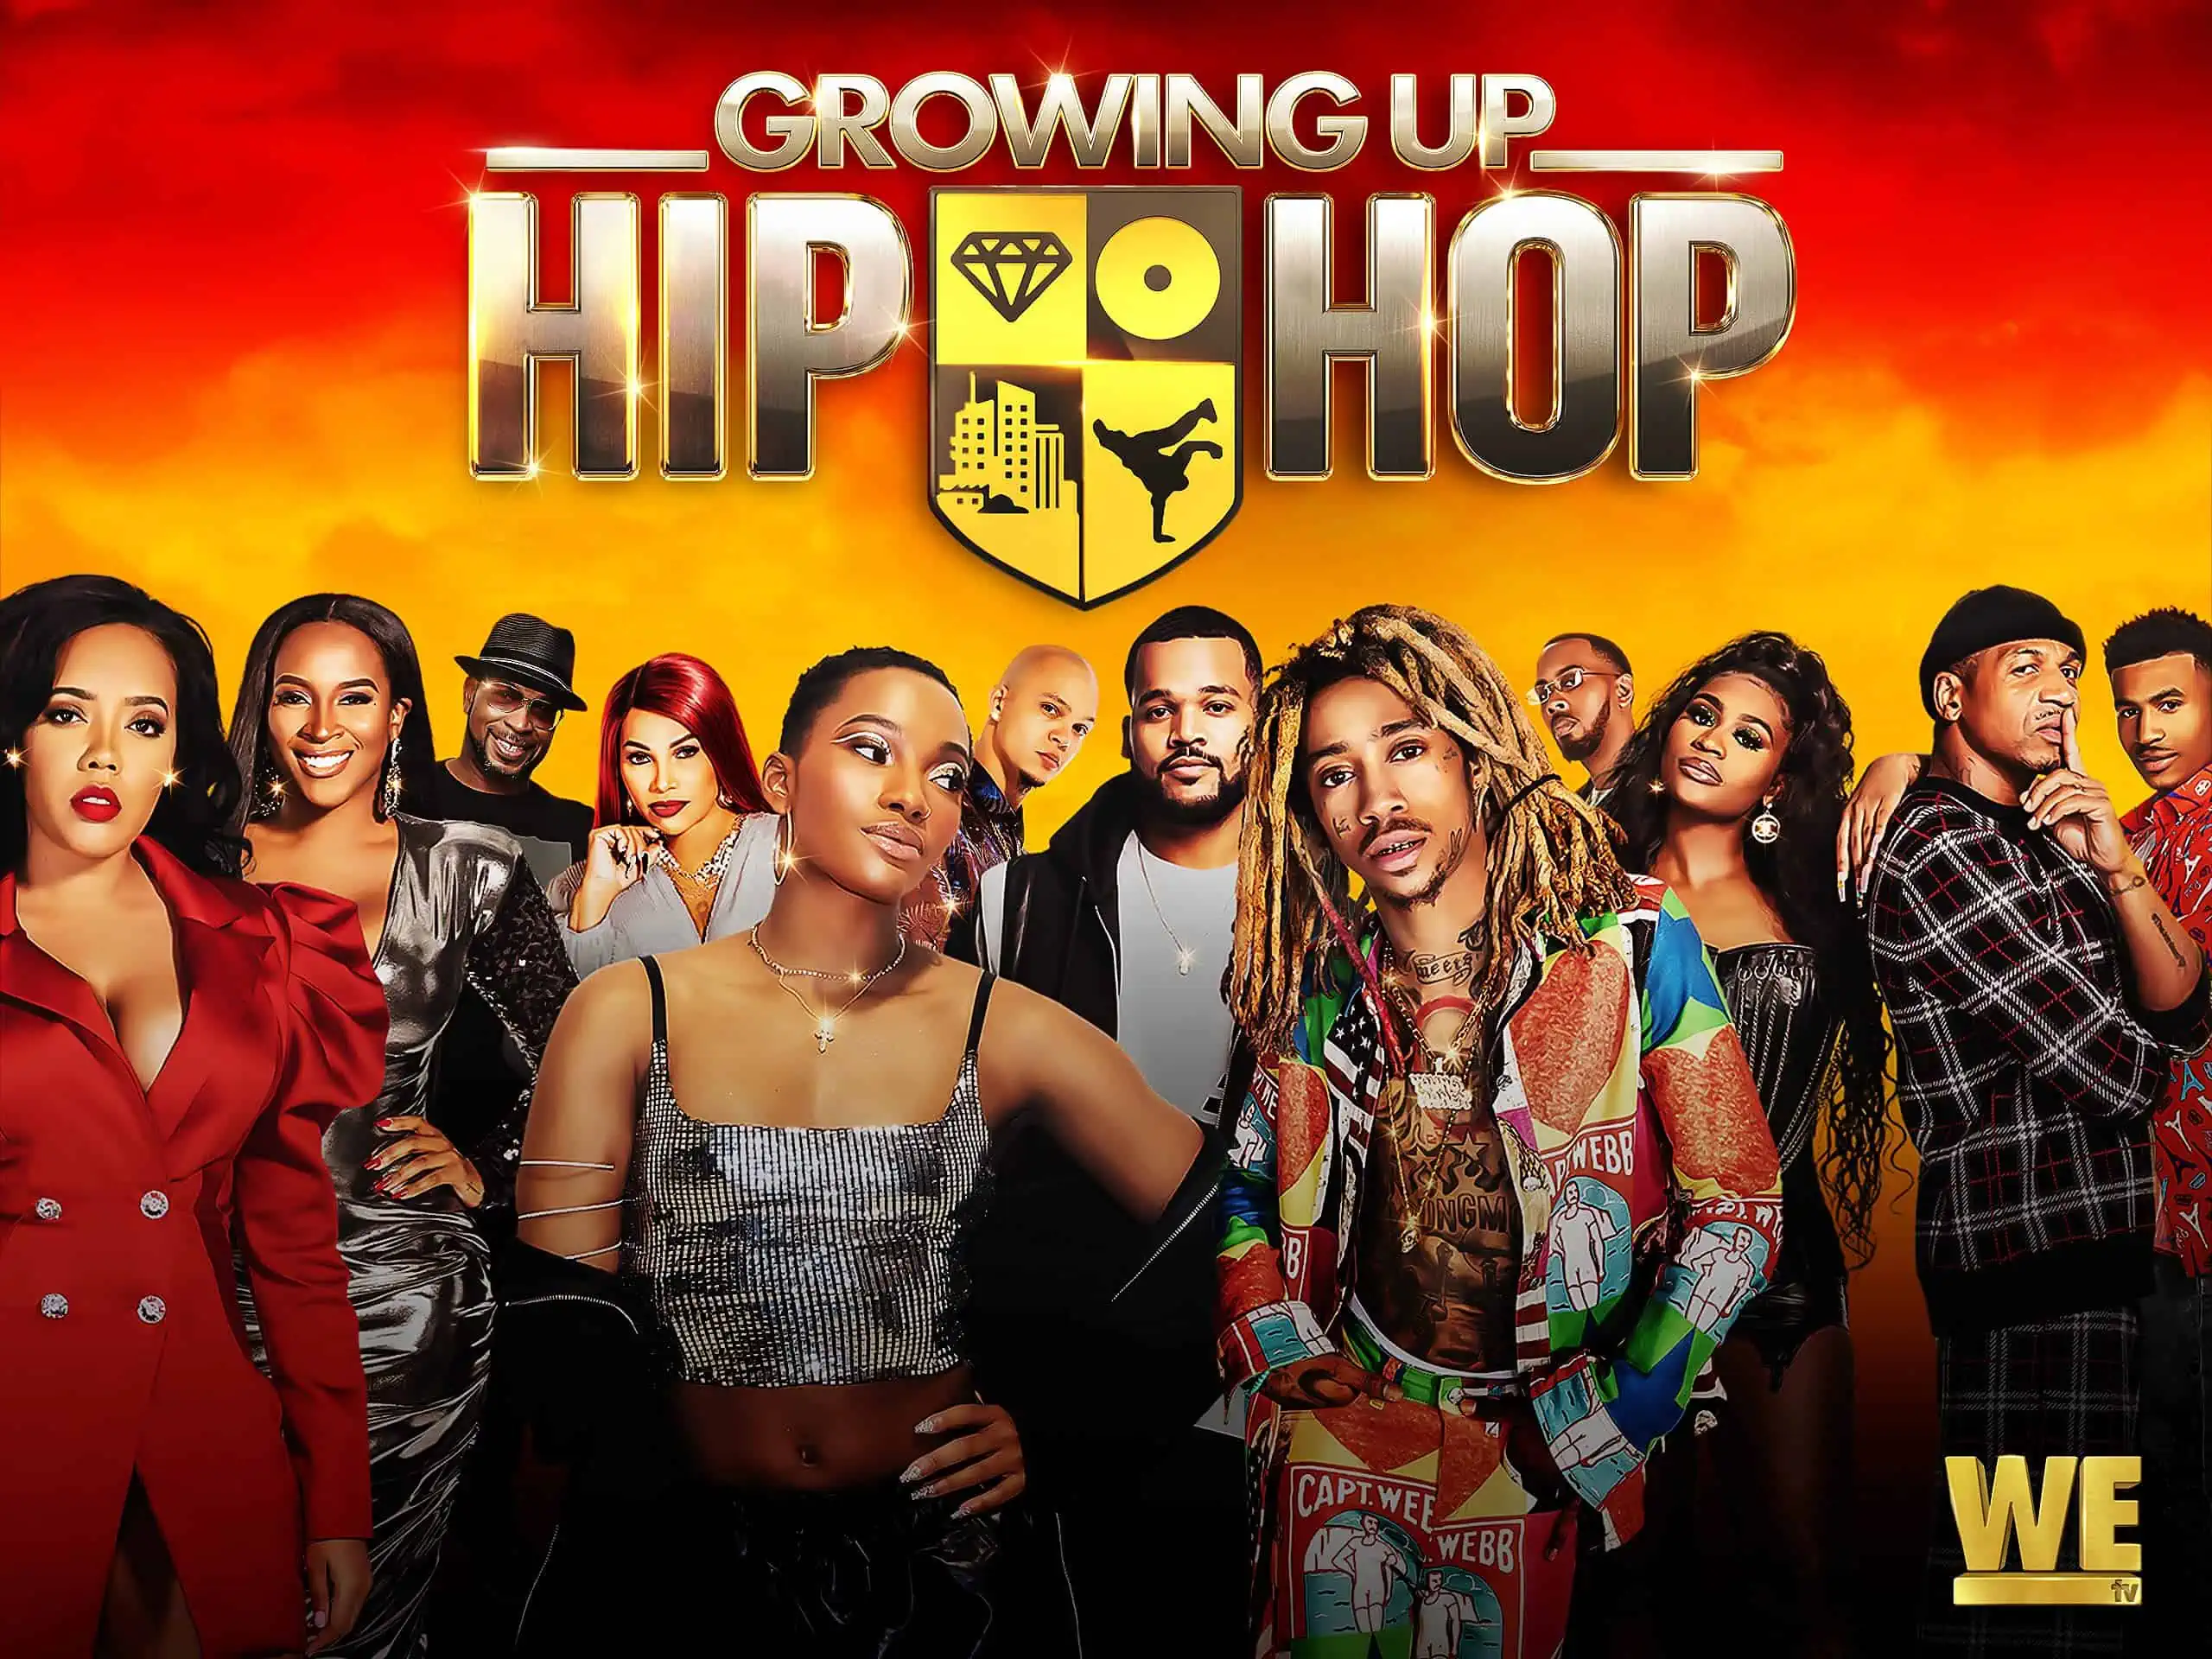 What You Need to Know About “Growing Up Hip Hop”